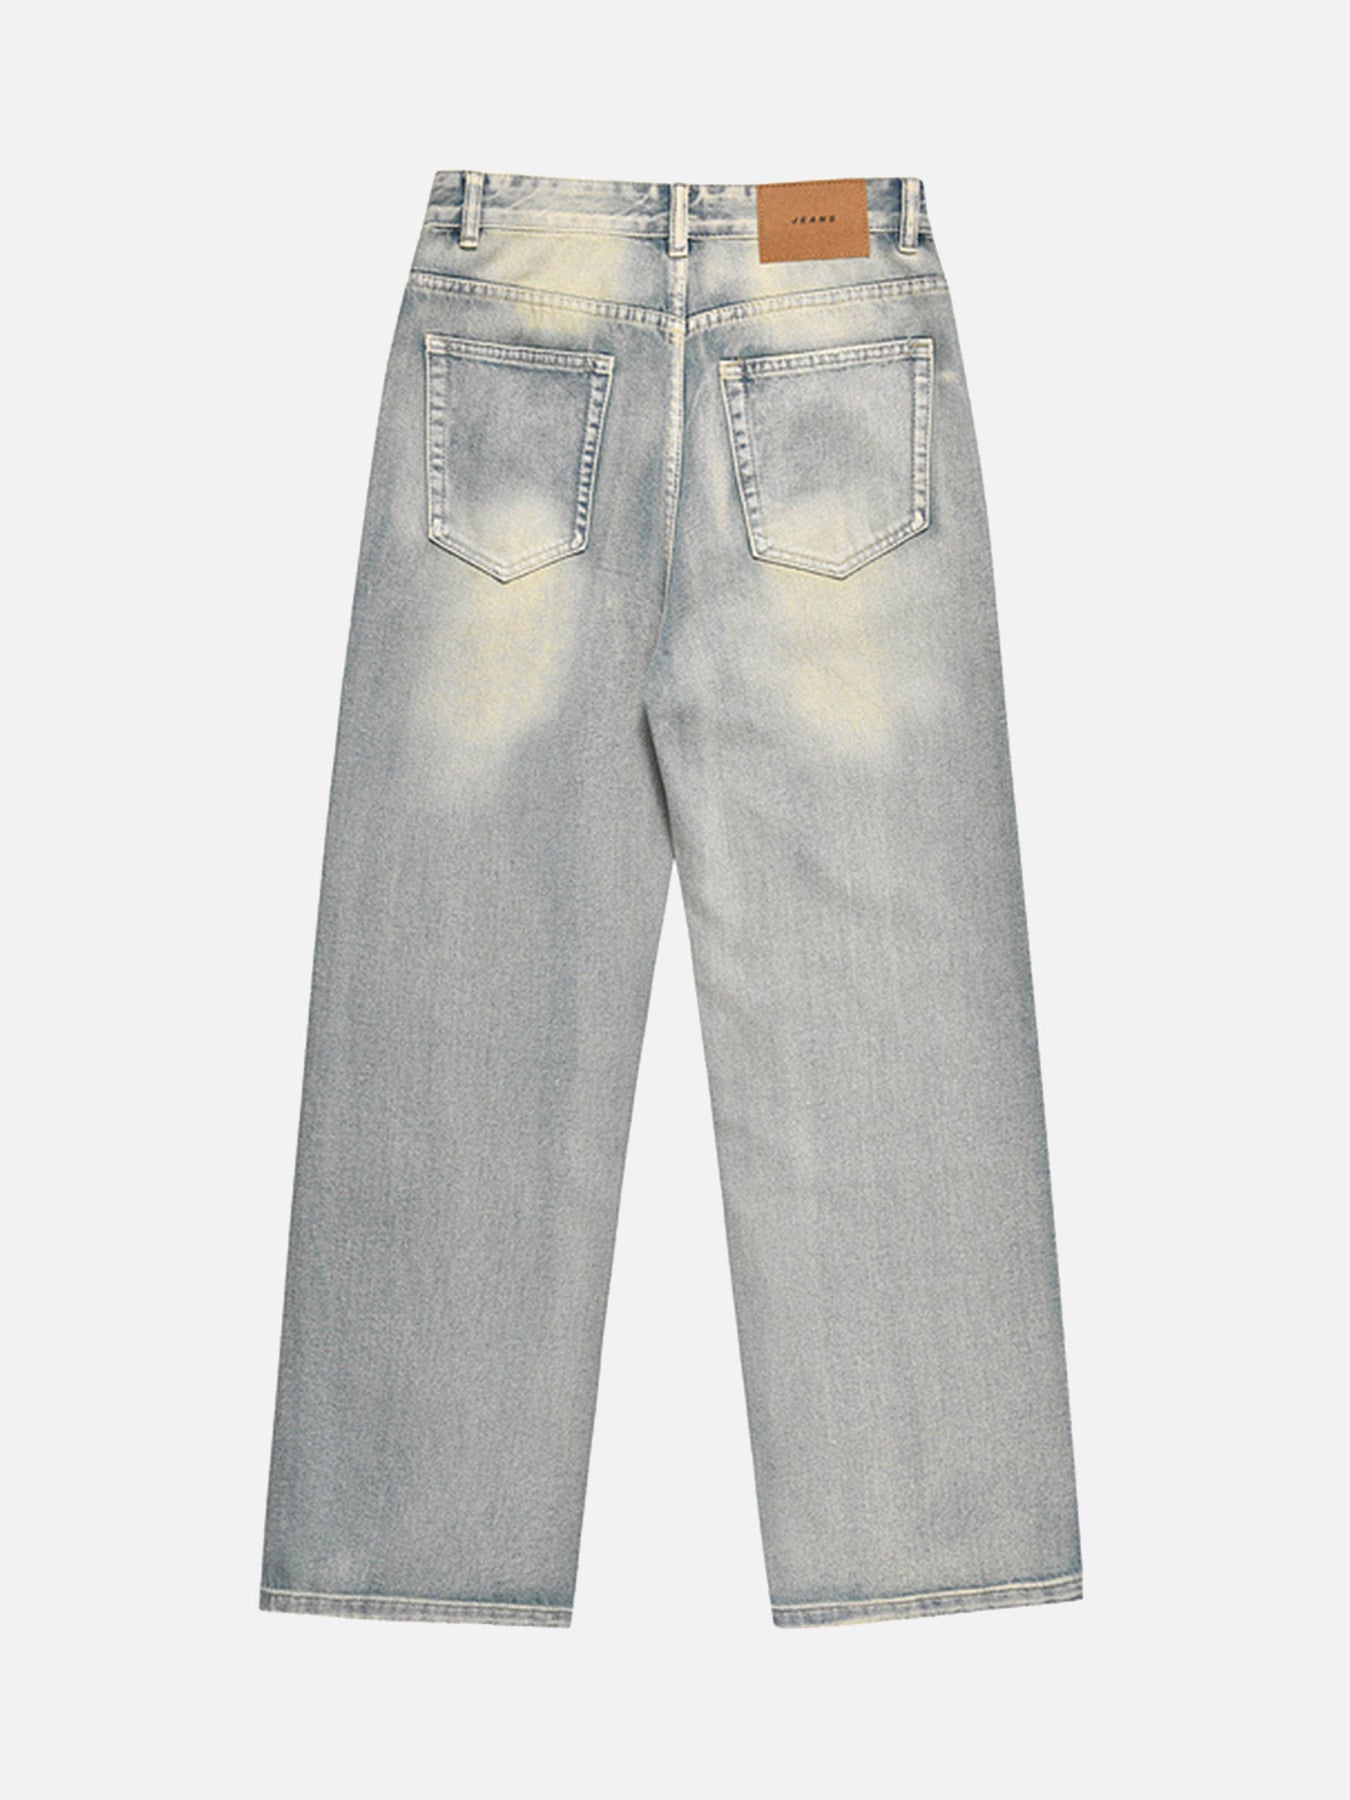 Thesupermade Washed And Worn Loose Jeans